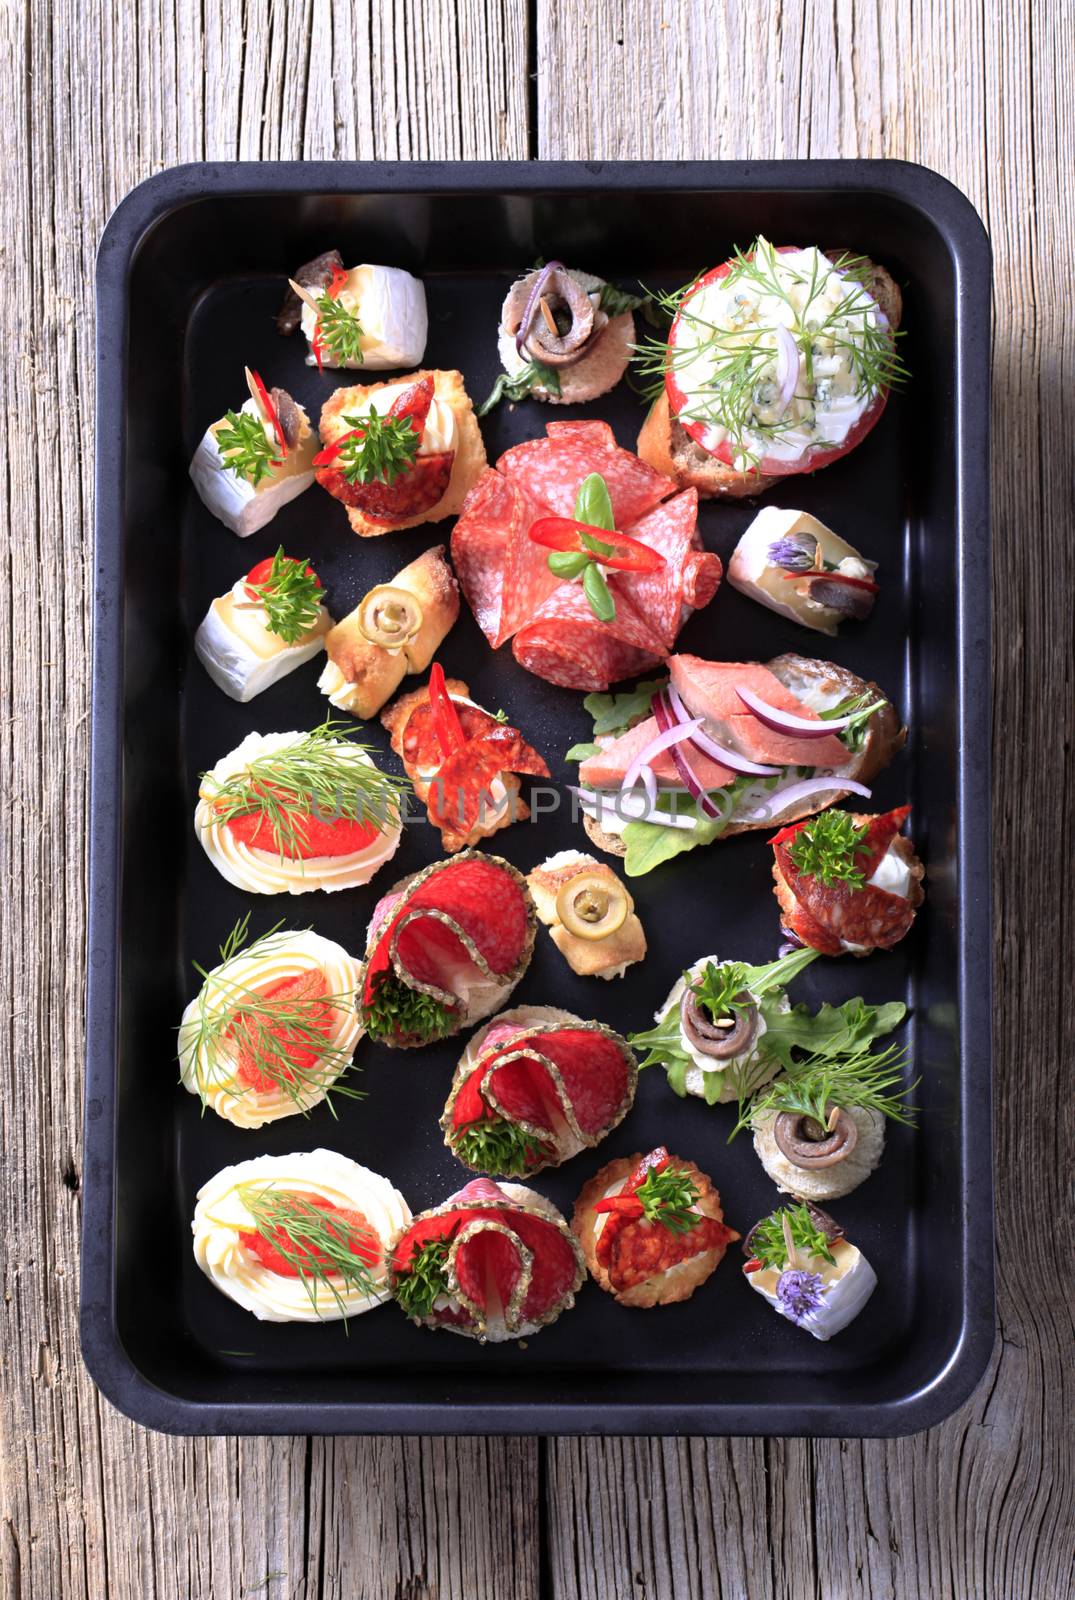 Assortment of hors d'oeuvre on a black tray